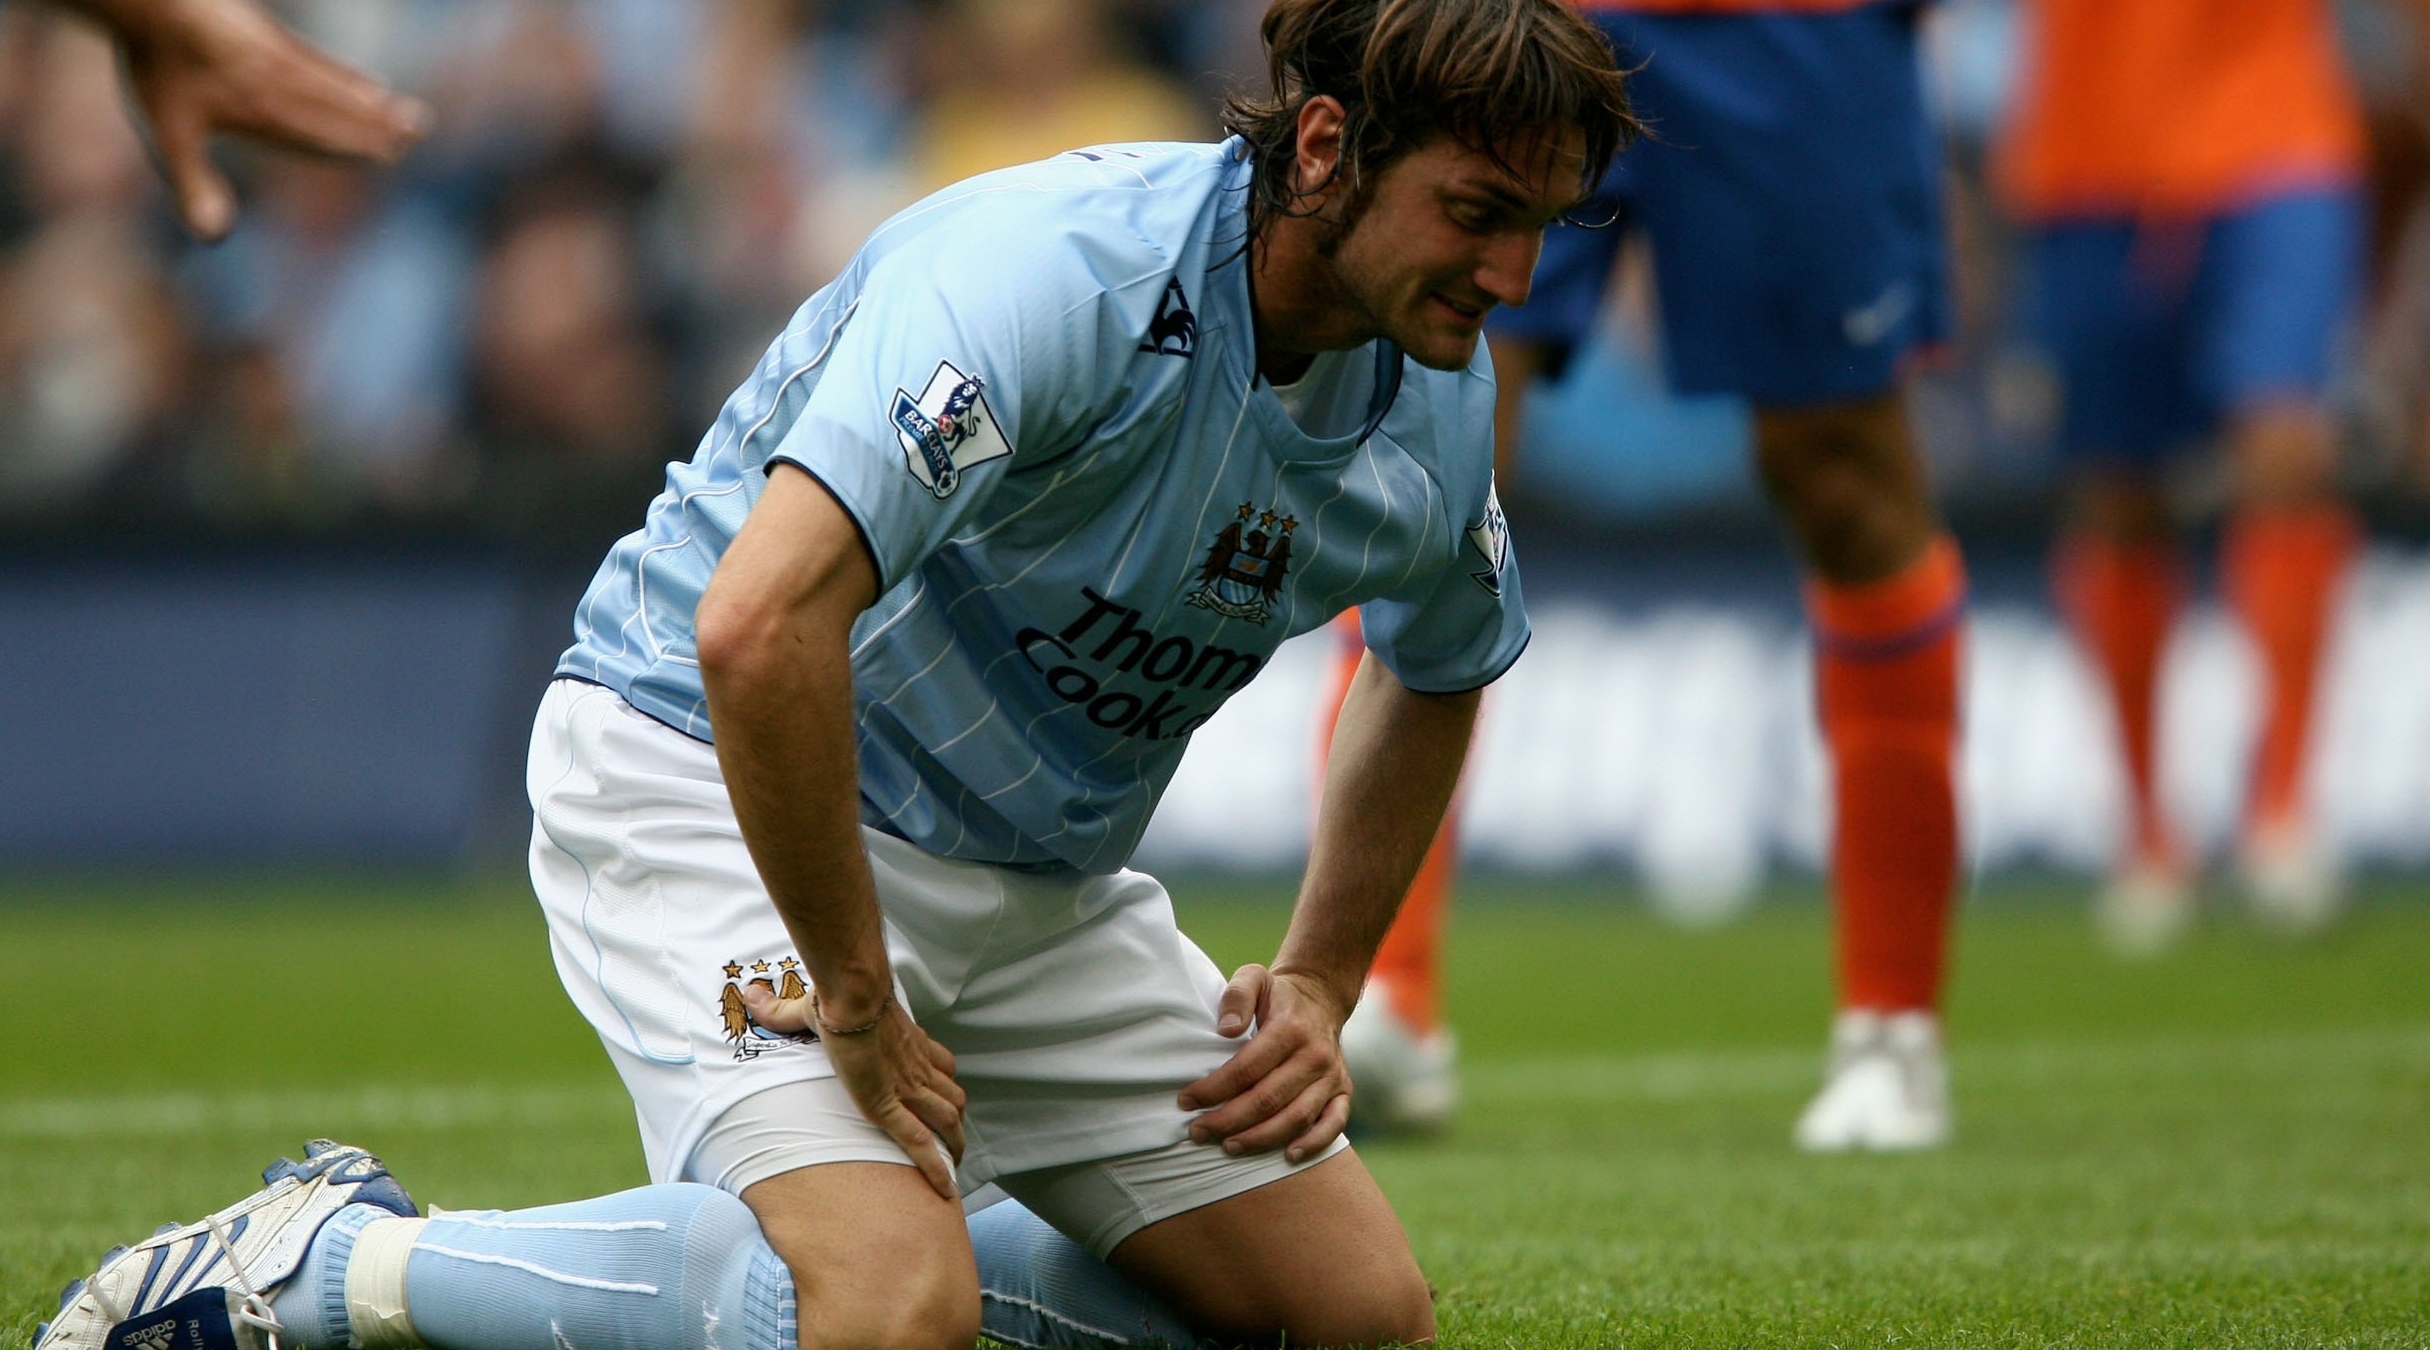 MANCHESTER, ENGLAND - AUGUST 4: Rolando Bianchi of Manchester City shows his dejection during the friendly match between Manchester City and Valencia at the City of Manchester stadium on August 4, 2007 in Manchester, England. (Photo by Clive Brunskill/Getty Images)